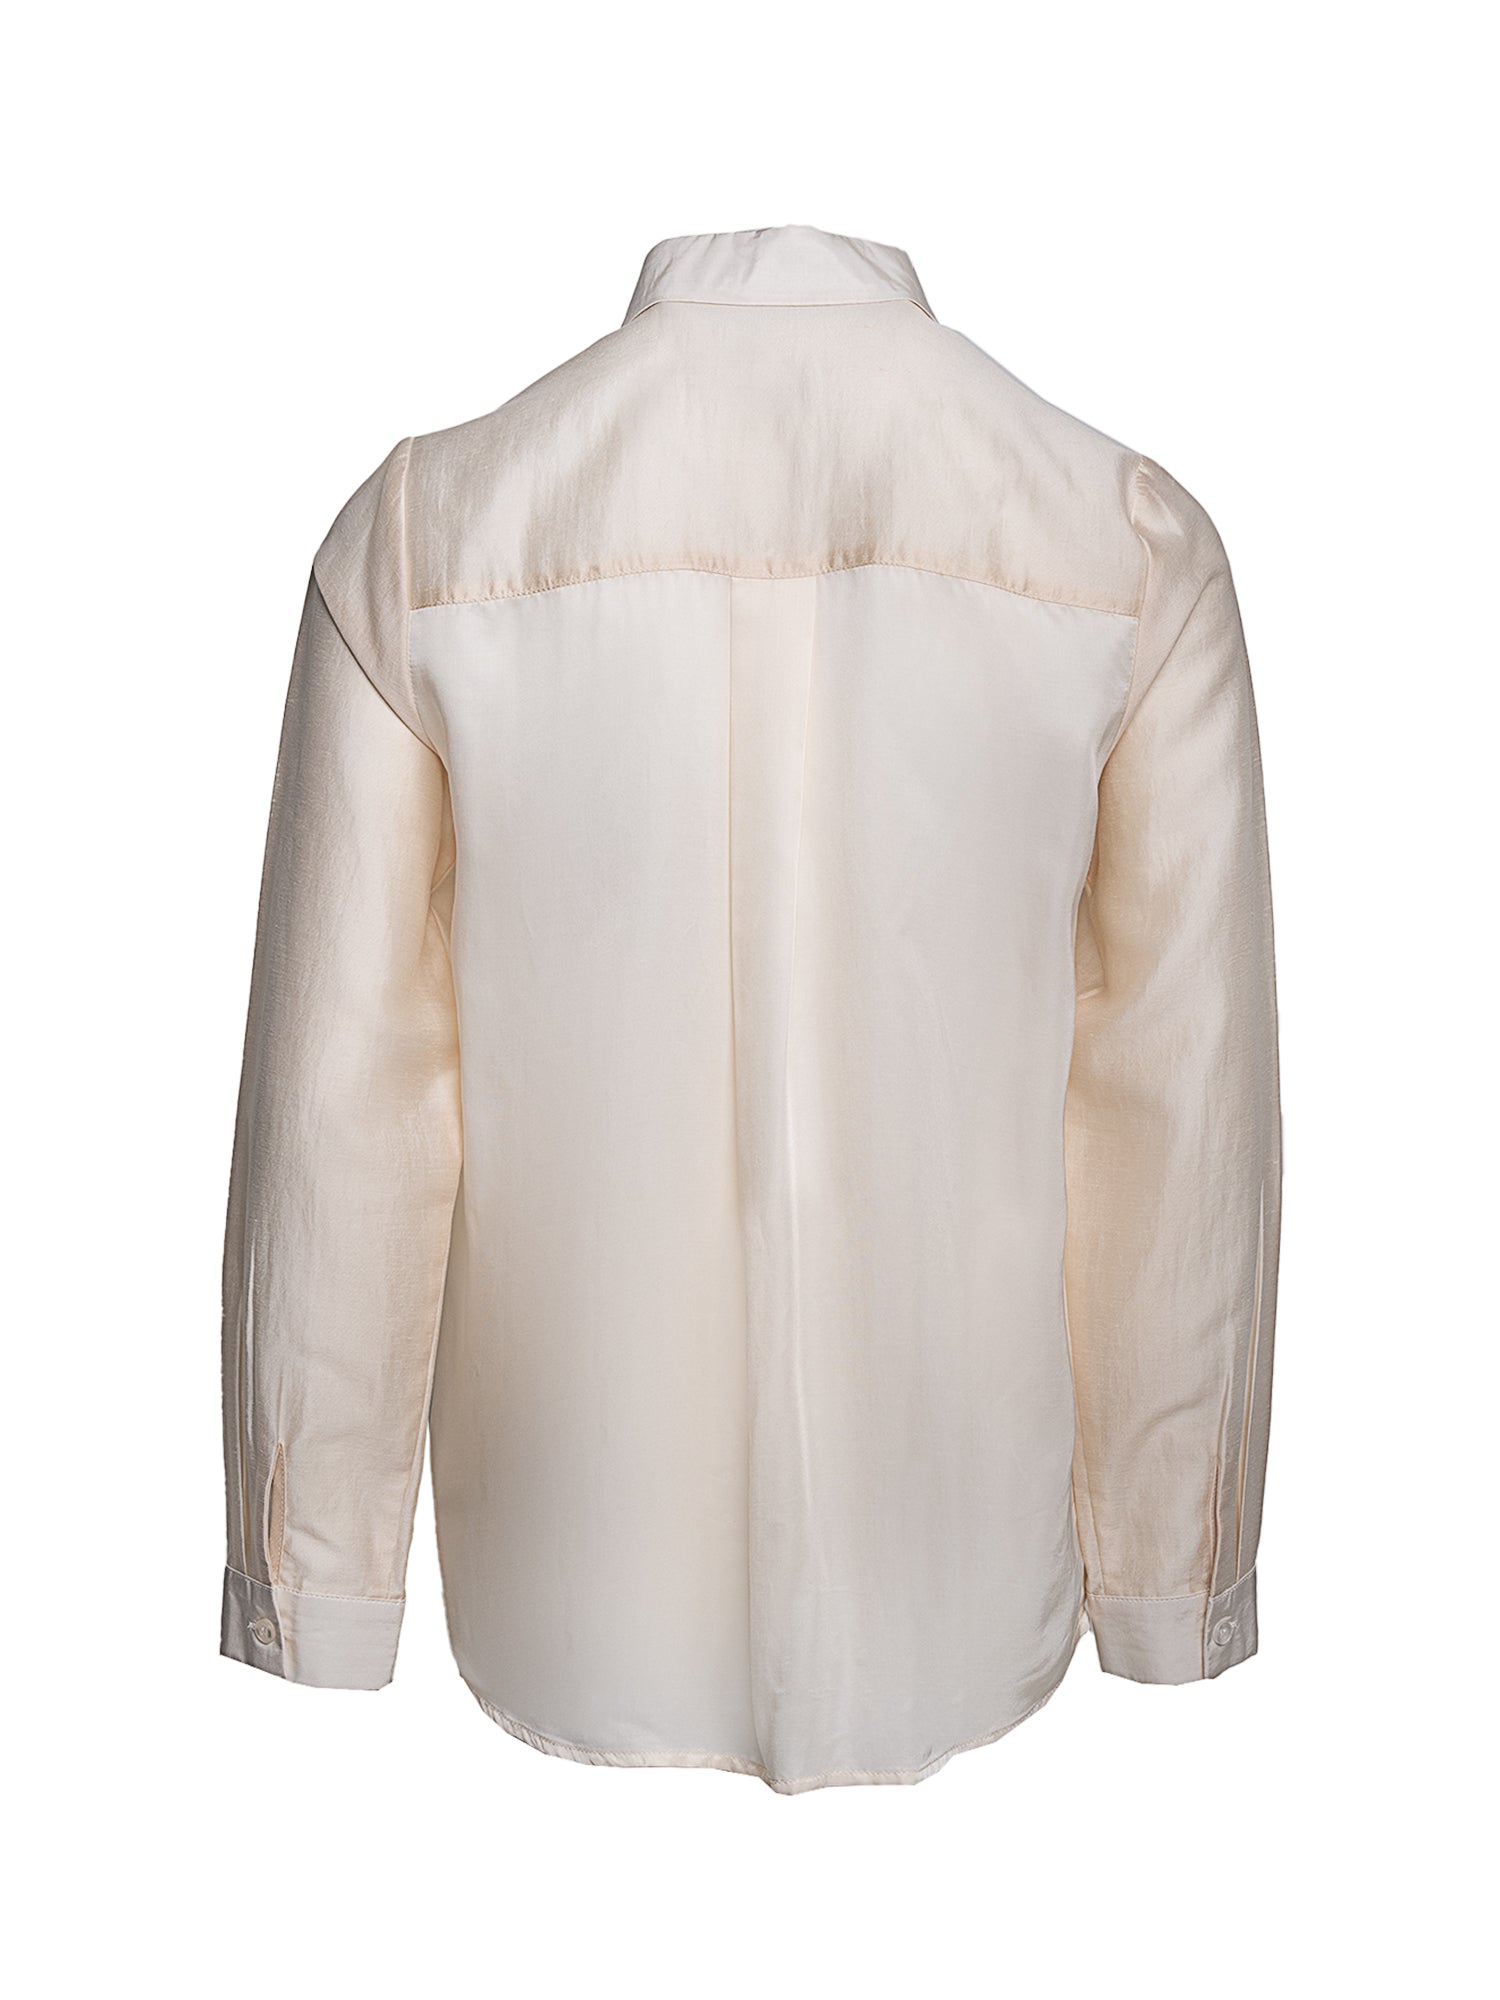 Blanche Long Sleeve Shirt with Sheer Panels